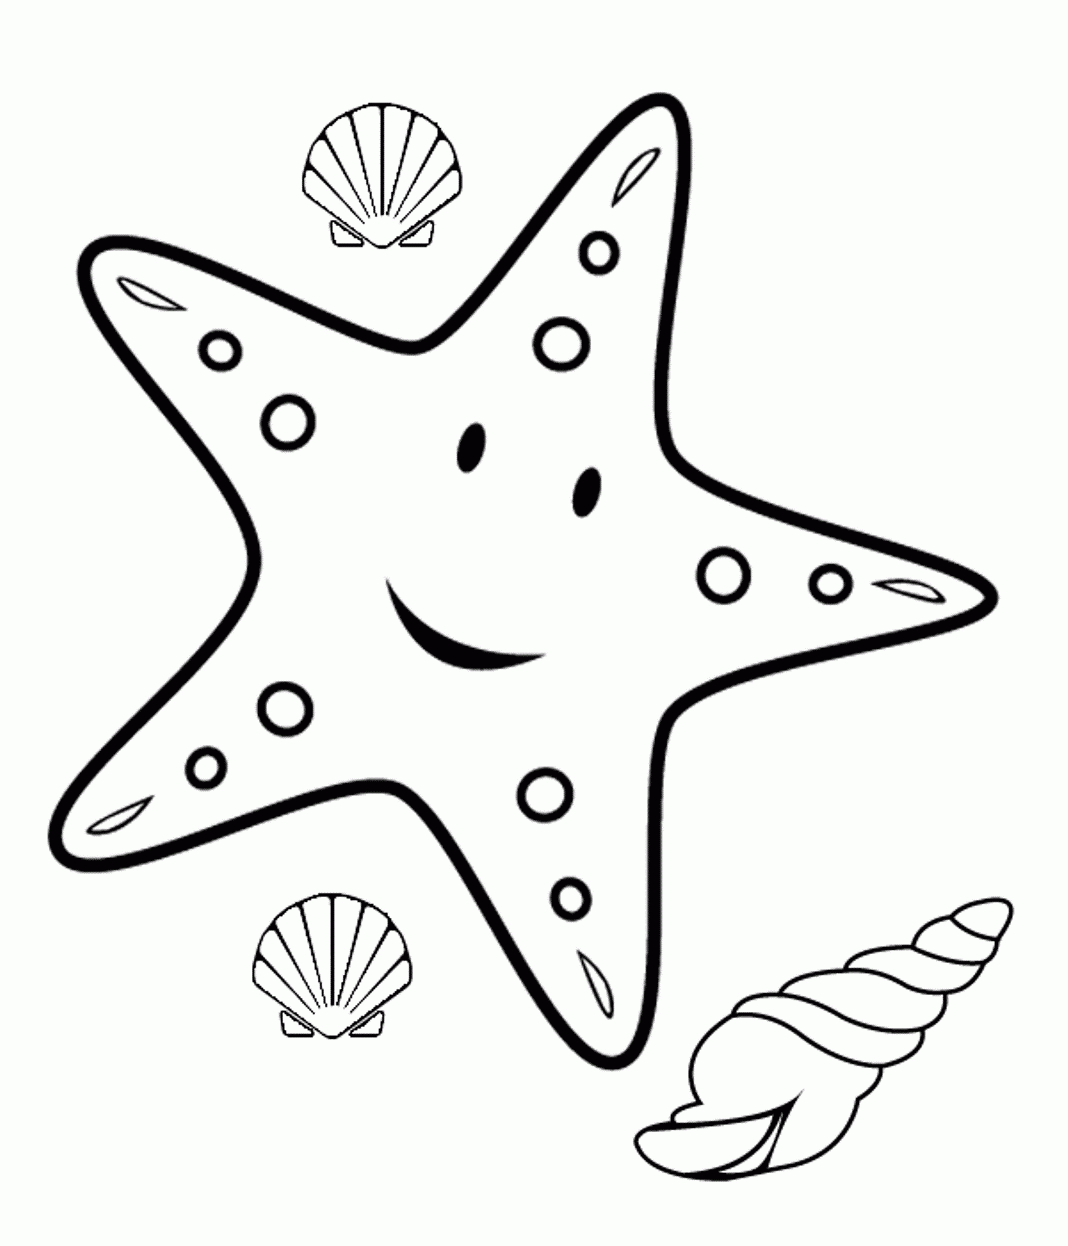 10 Free Pictures for: Starfish Coloring Page. Temoon.us